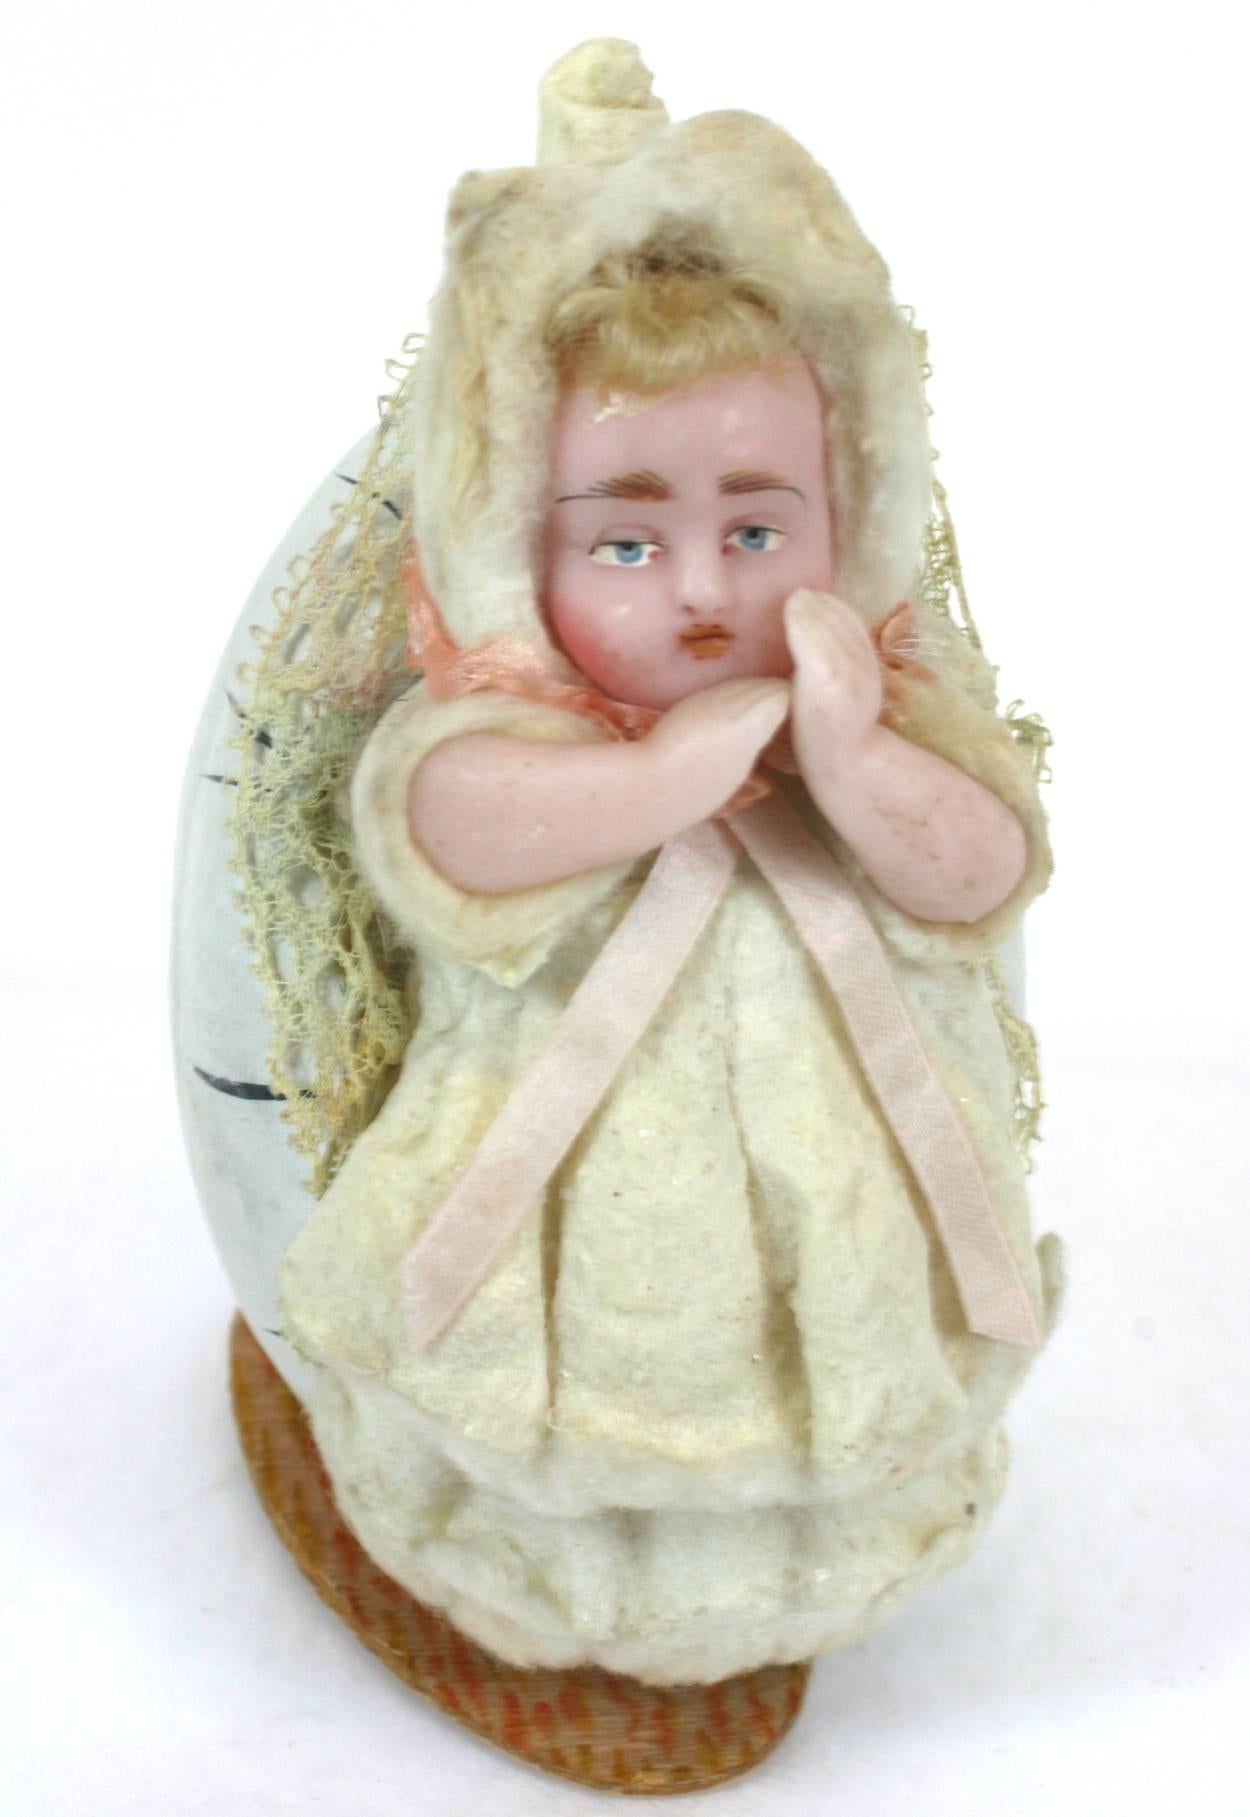 German wax baby candy container from the late 19th century. A realistically formed egg of paper and plaster with a fully detailed and dressed wax baby nestled inside. Charming subject matter and lovely detailing, down to the hand knitted stocking.